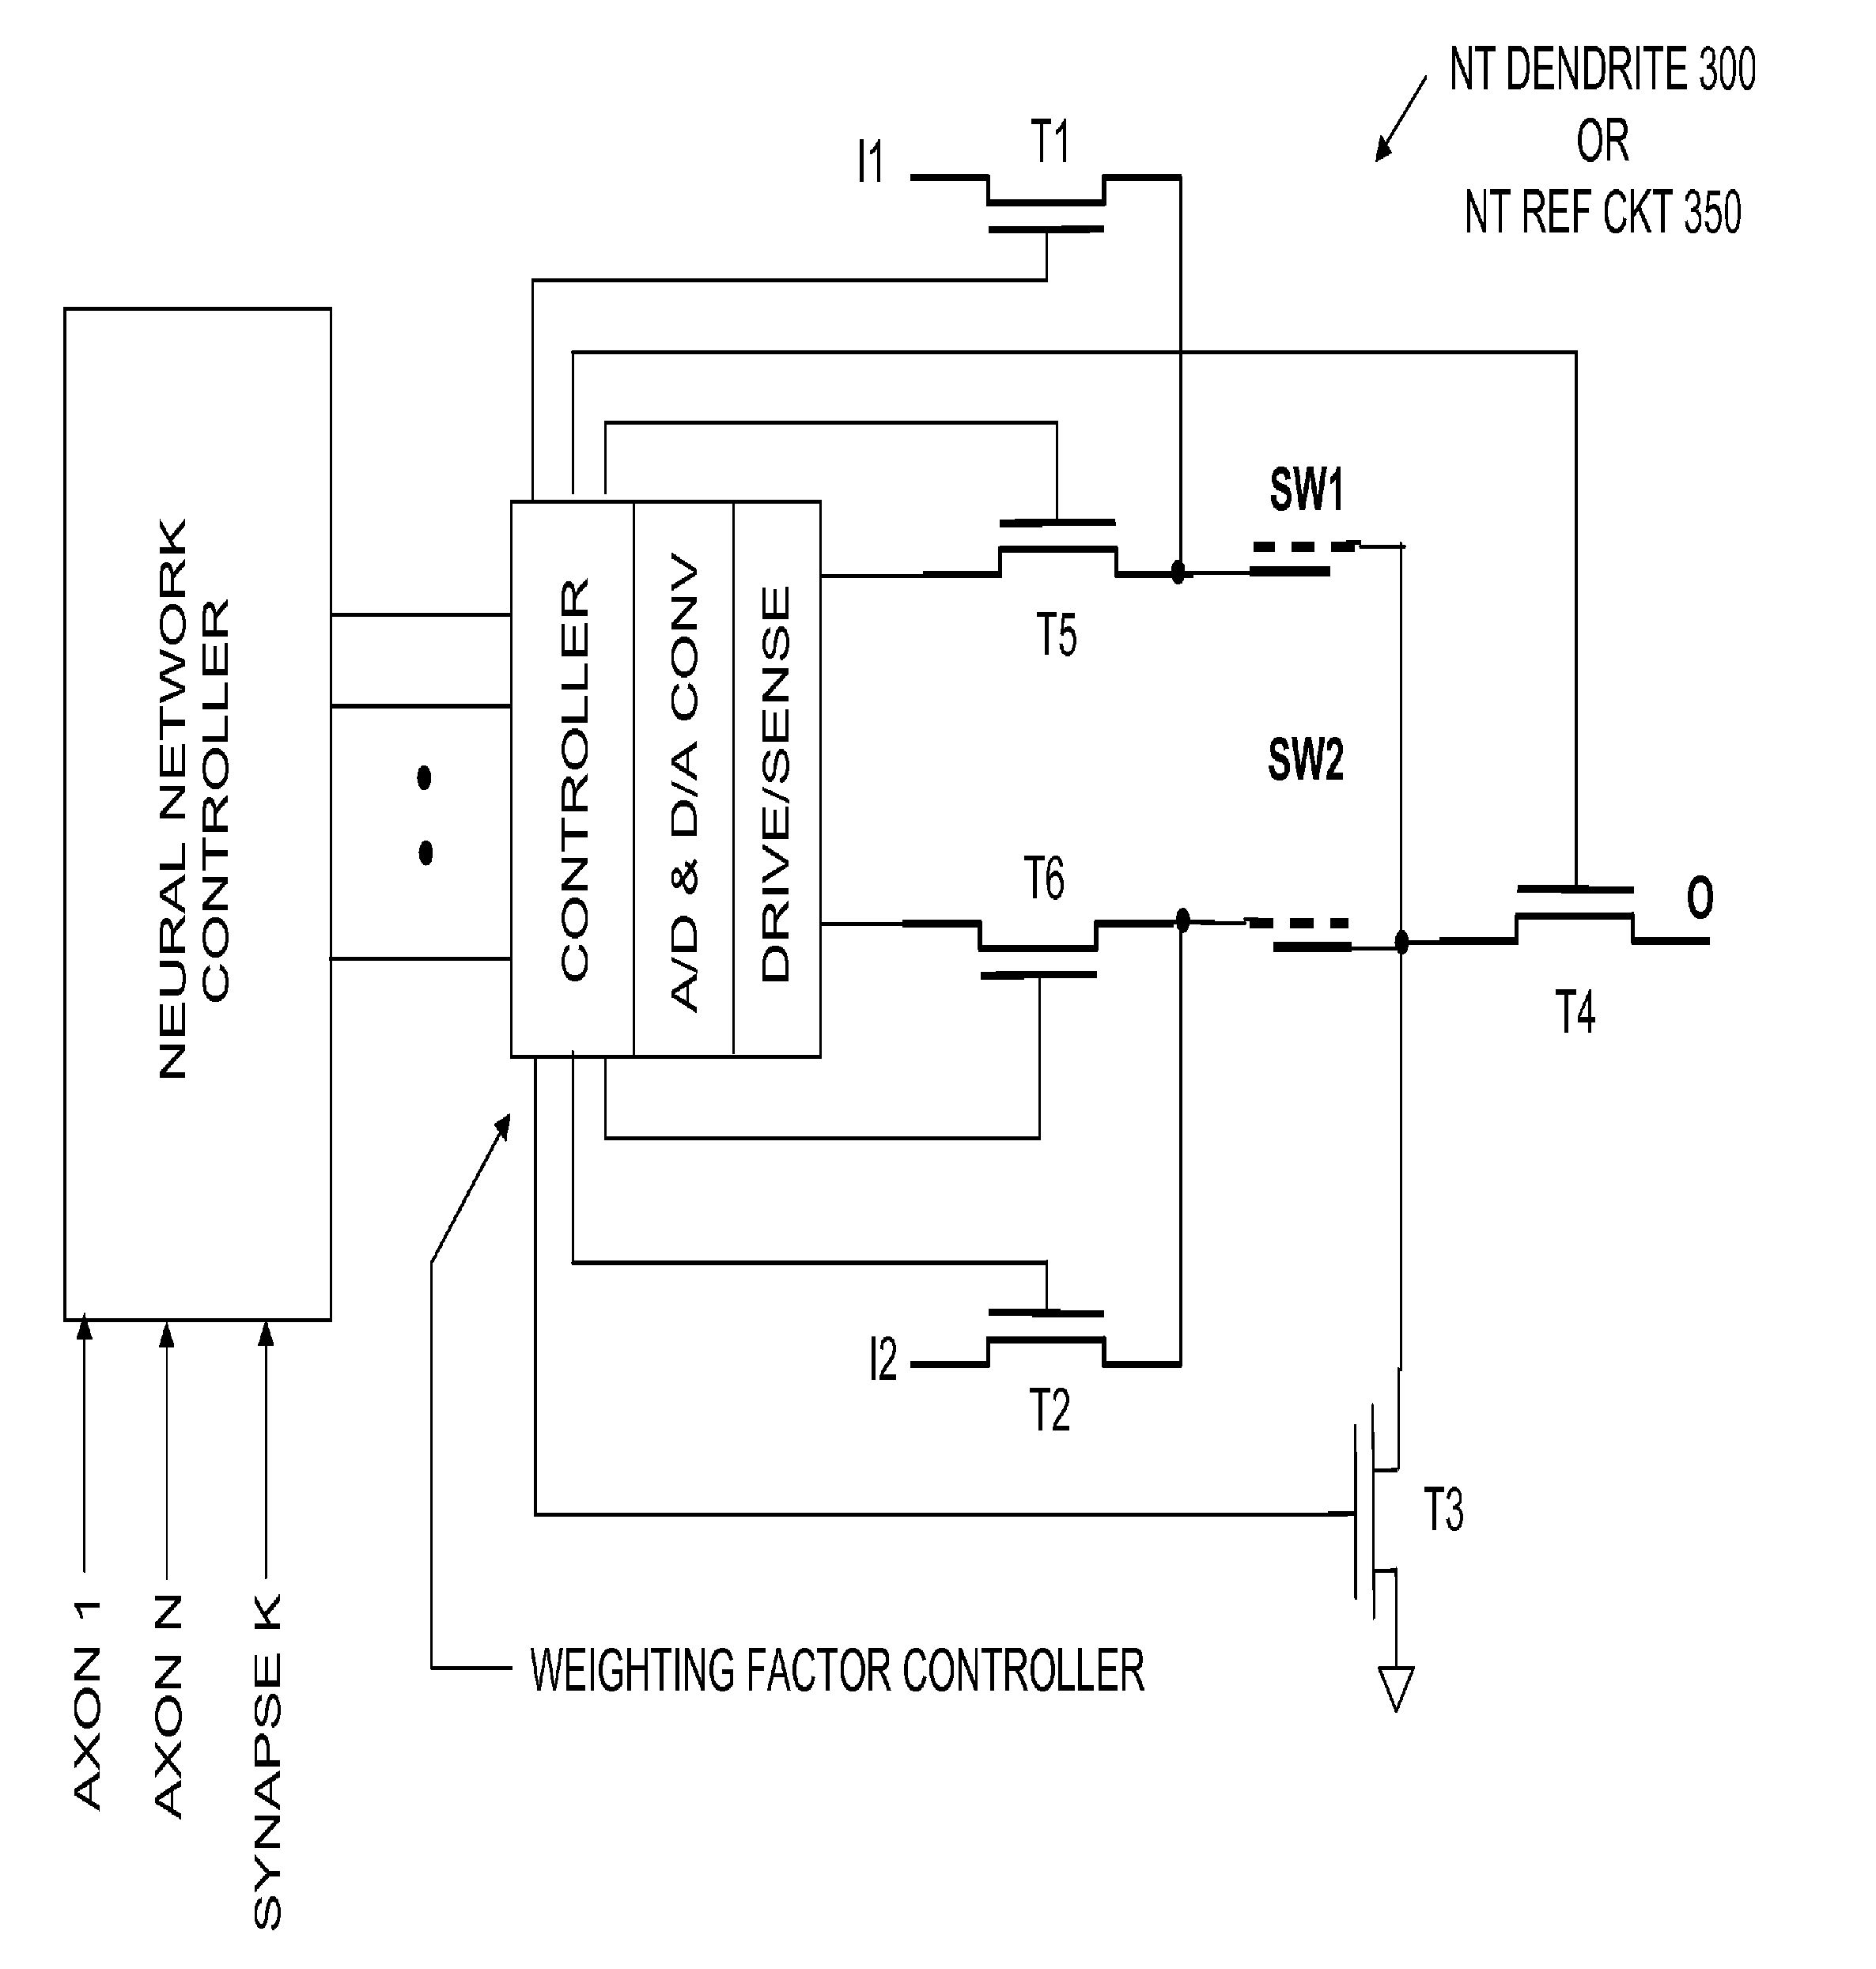 Carbon nanotube-based neural networks and methods of making and using same